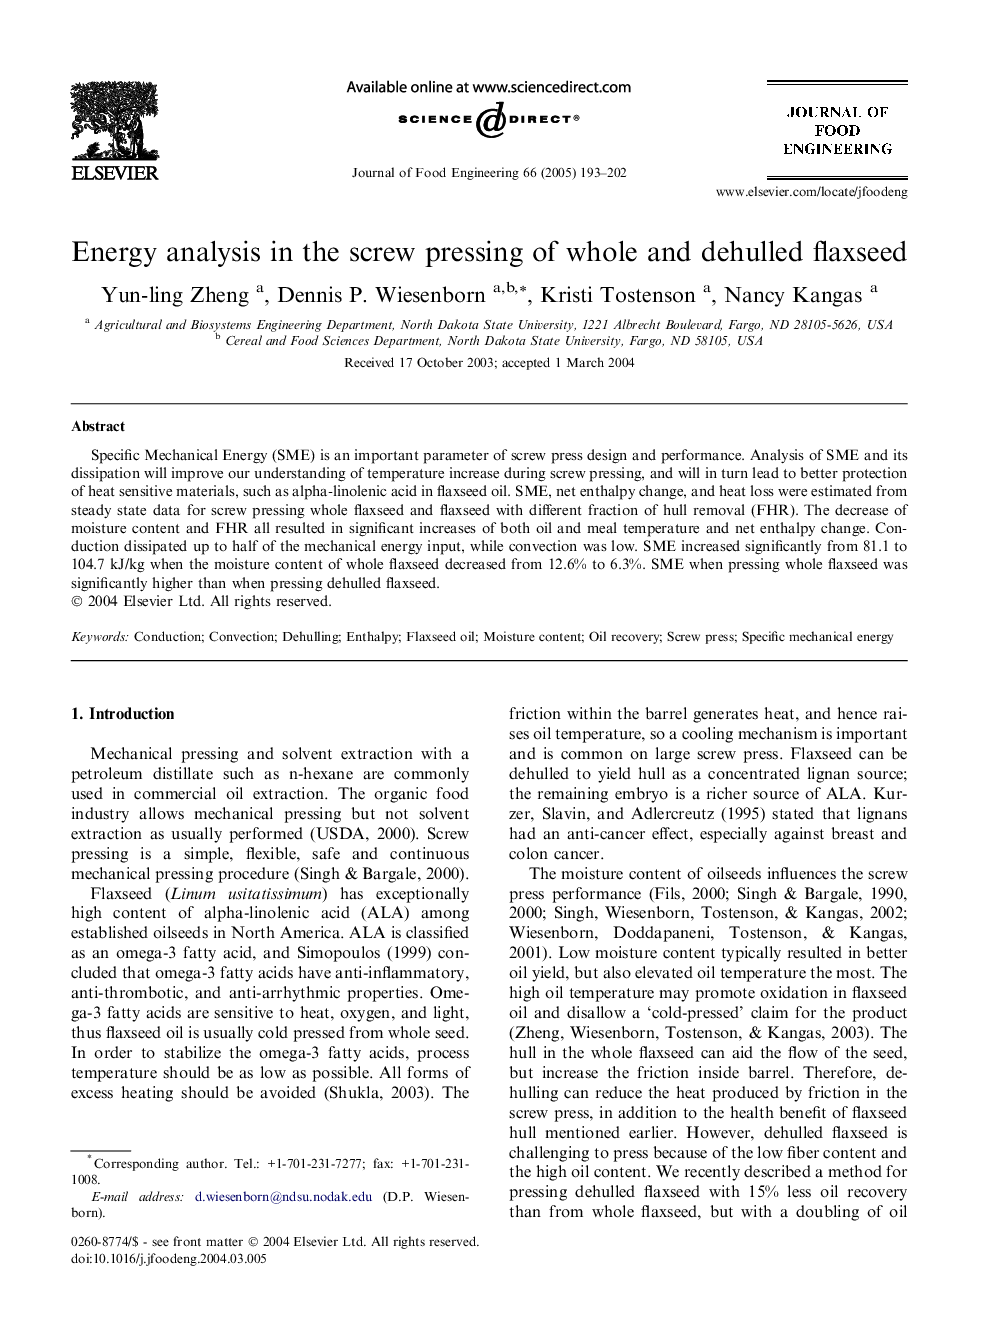 Energy analysis in the screw pressing of whole and dehulled flaxseed